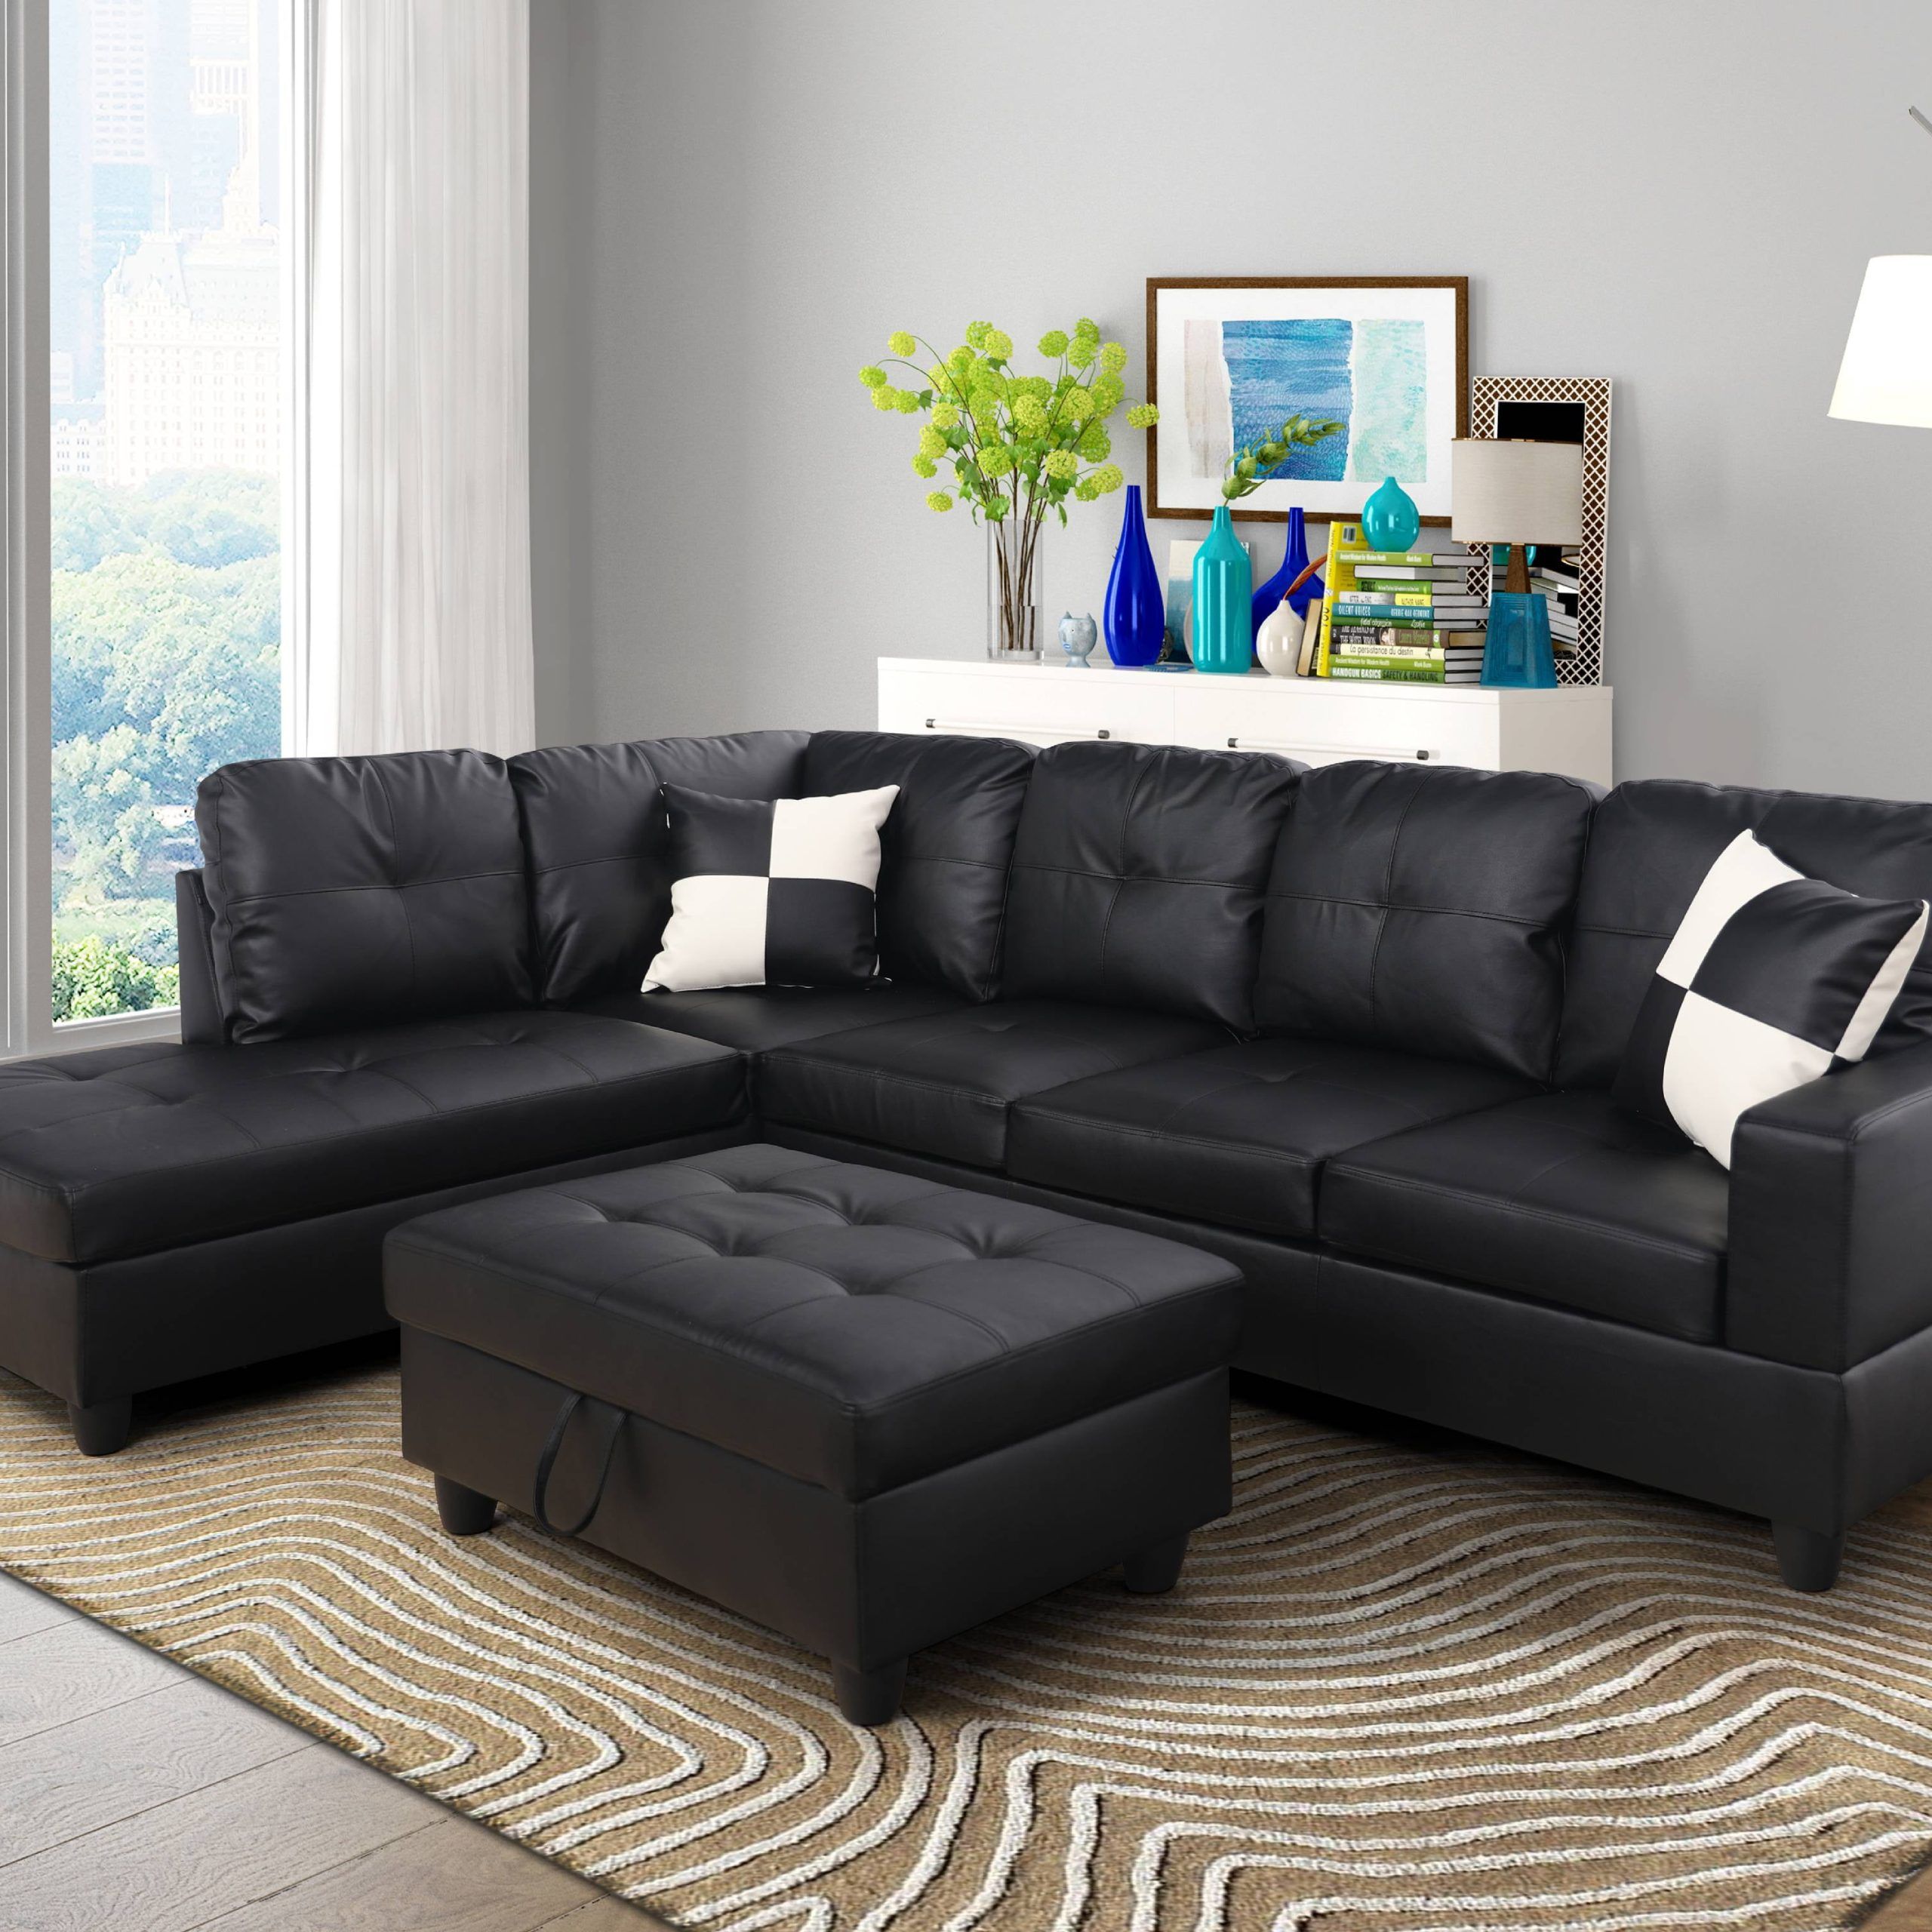 Preferred For U Furnishing Classic Black Faux Leather Sectional Sofa, Right Within Sofas In Black (View 13 of 15)